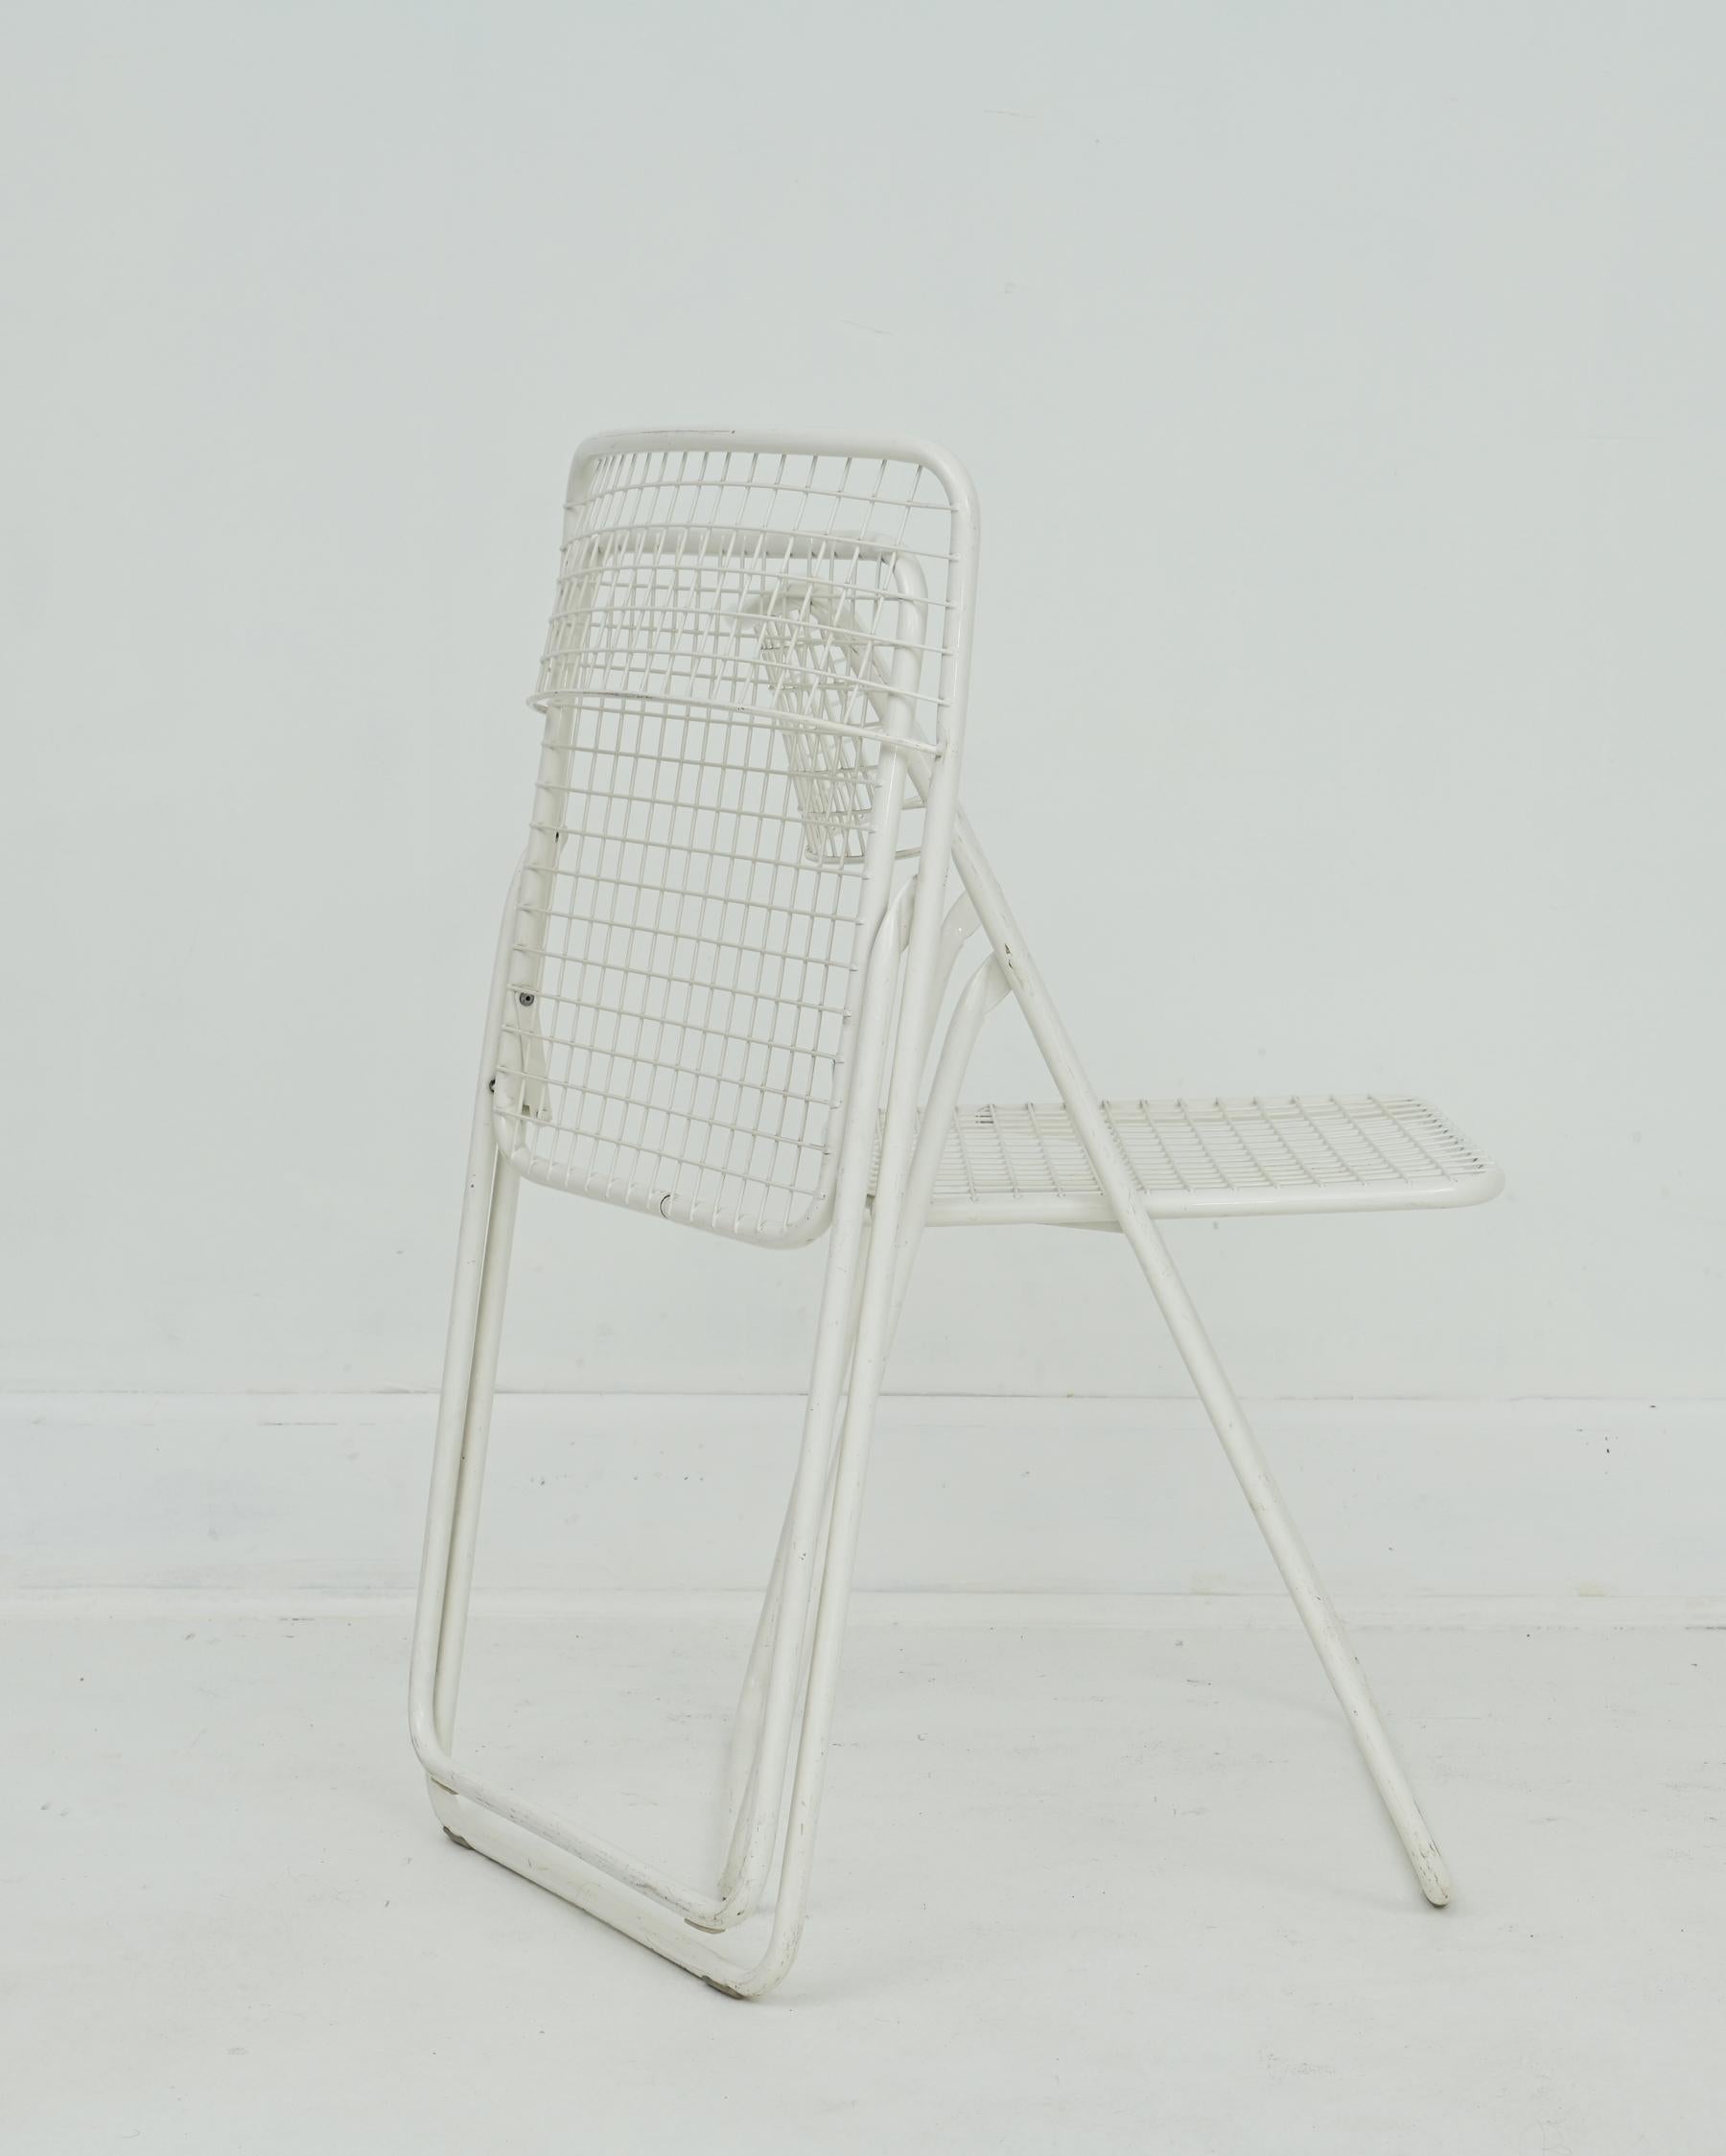 1979 white metal folding grid chairs designed by Niels Gammelgaard. Excellent condition, very nice color to go with anything. Minor scuffs from age and use. Four are available and sold in pairs. 